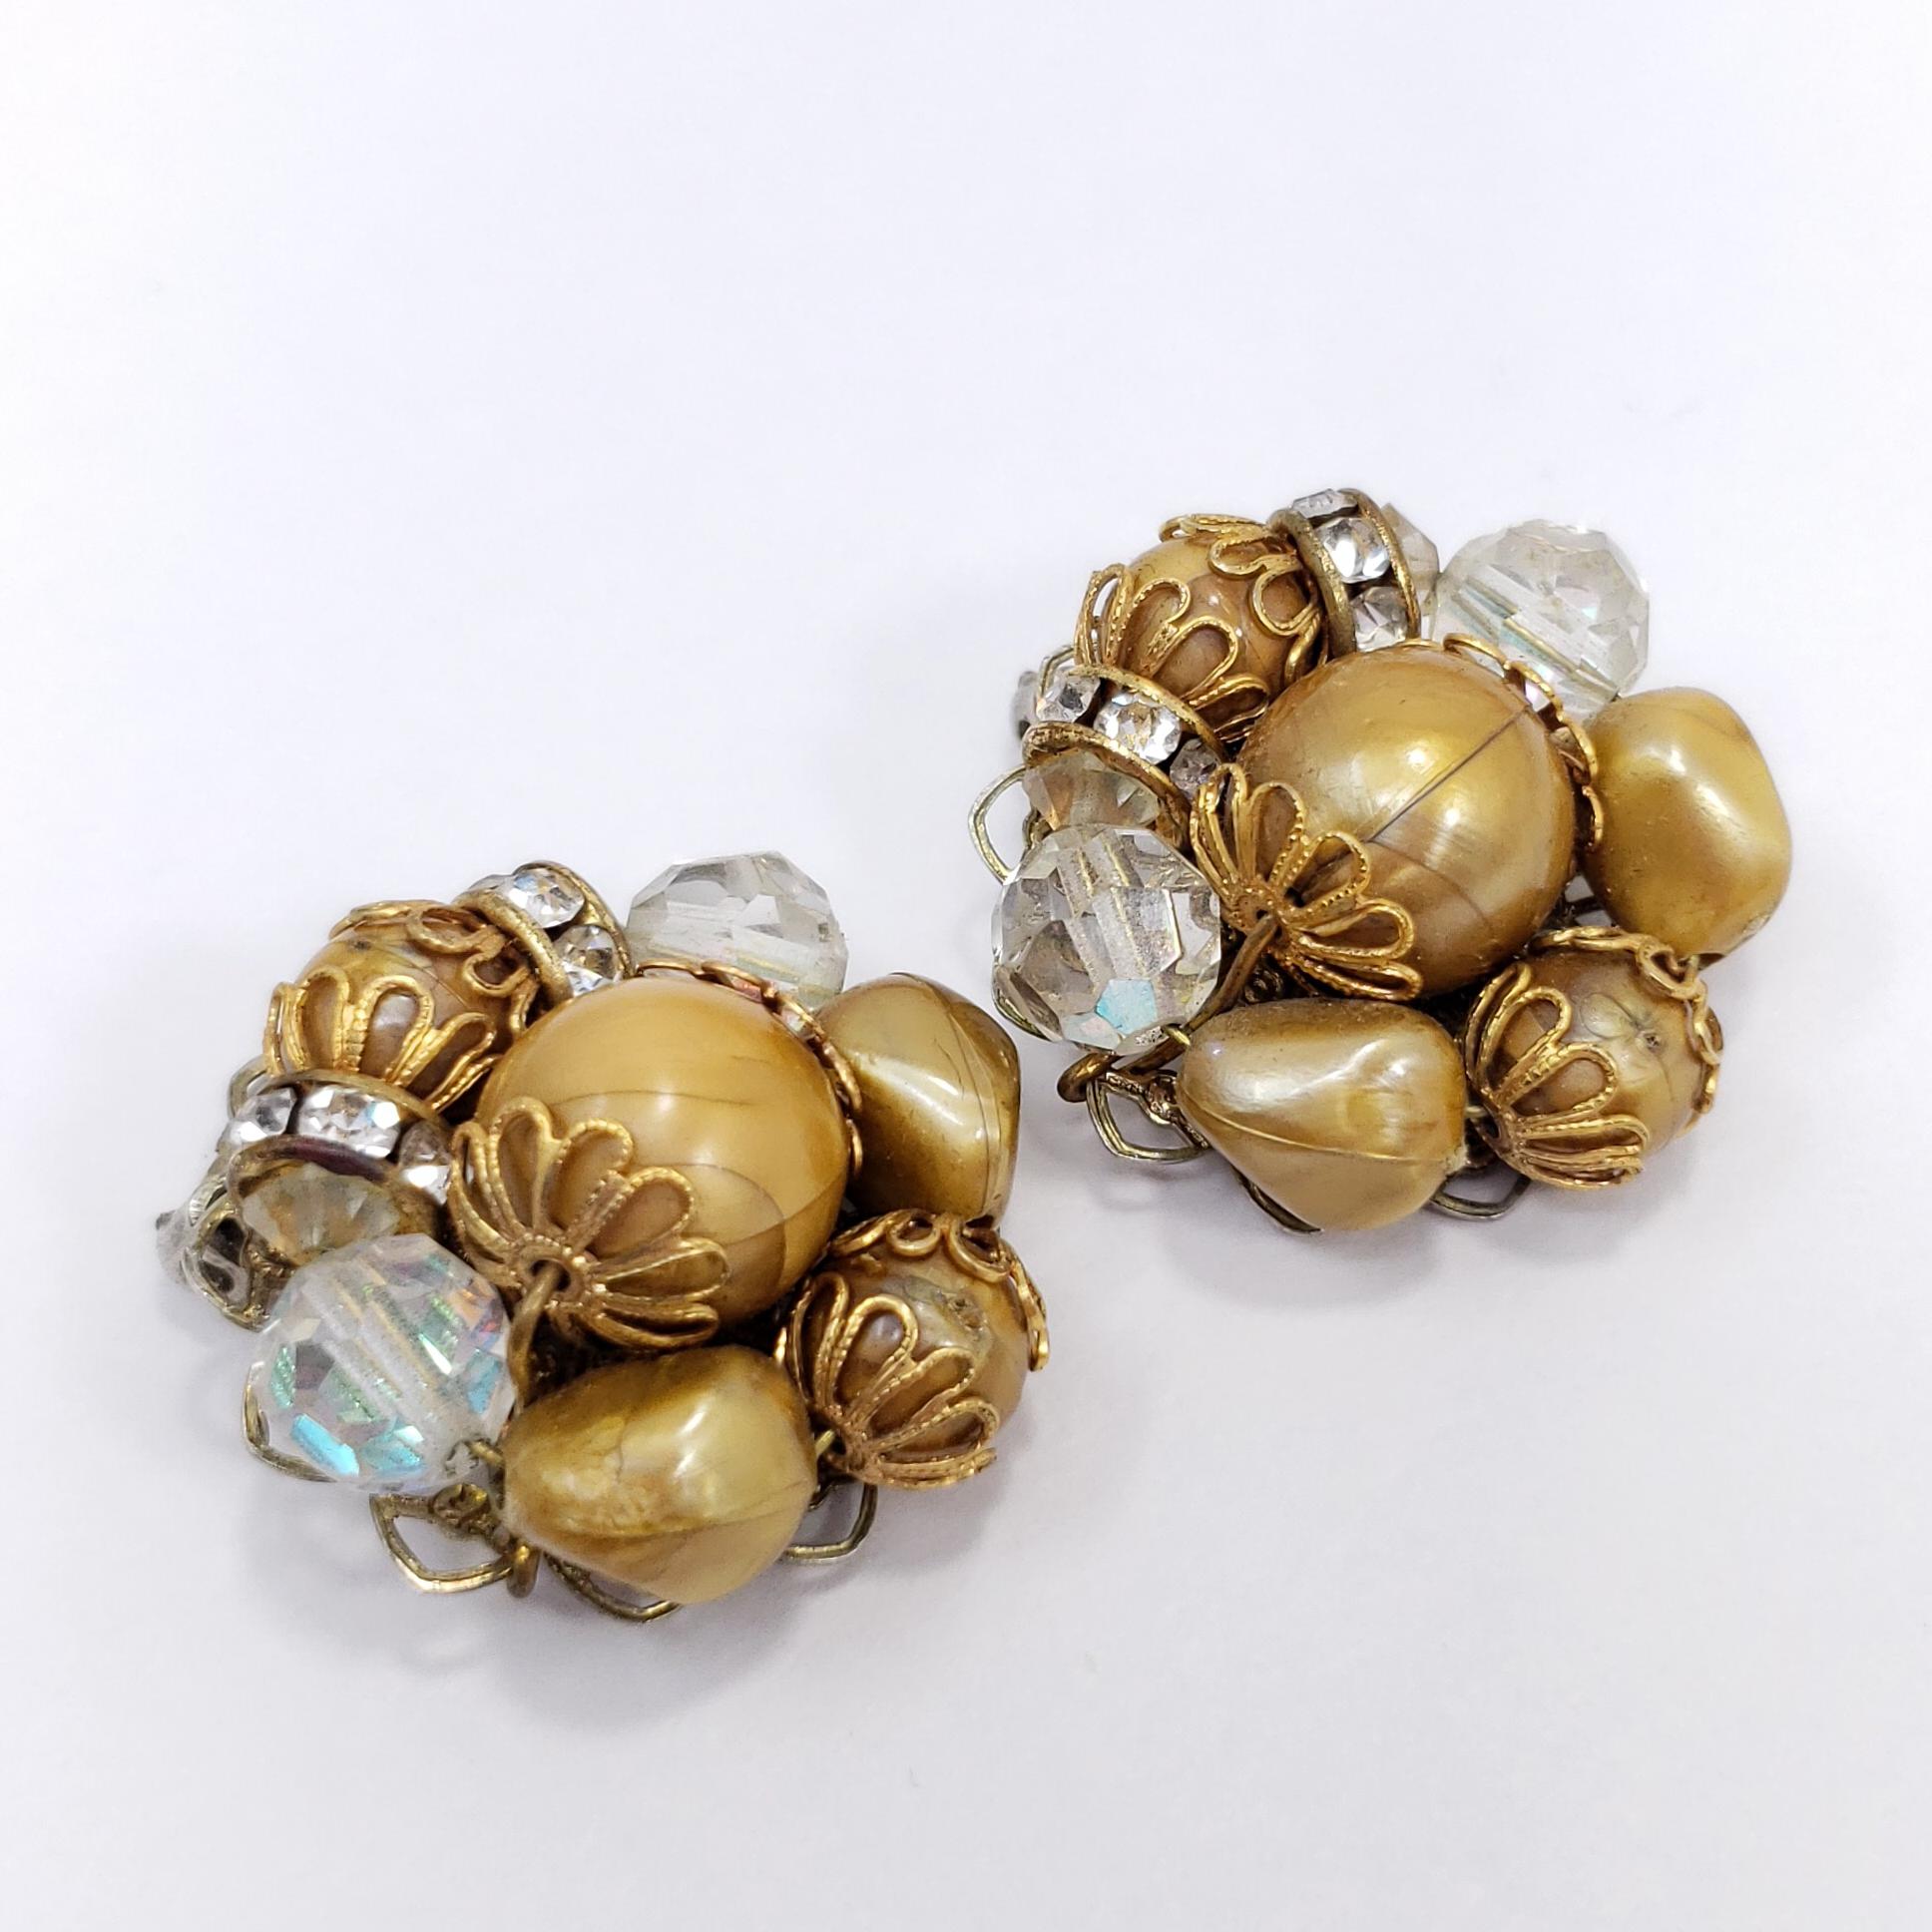 These stylish retro clip on earrings feature clusters of caramel beads and sparkling aurora borealis crystals. Silver and brass tone.